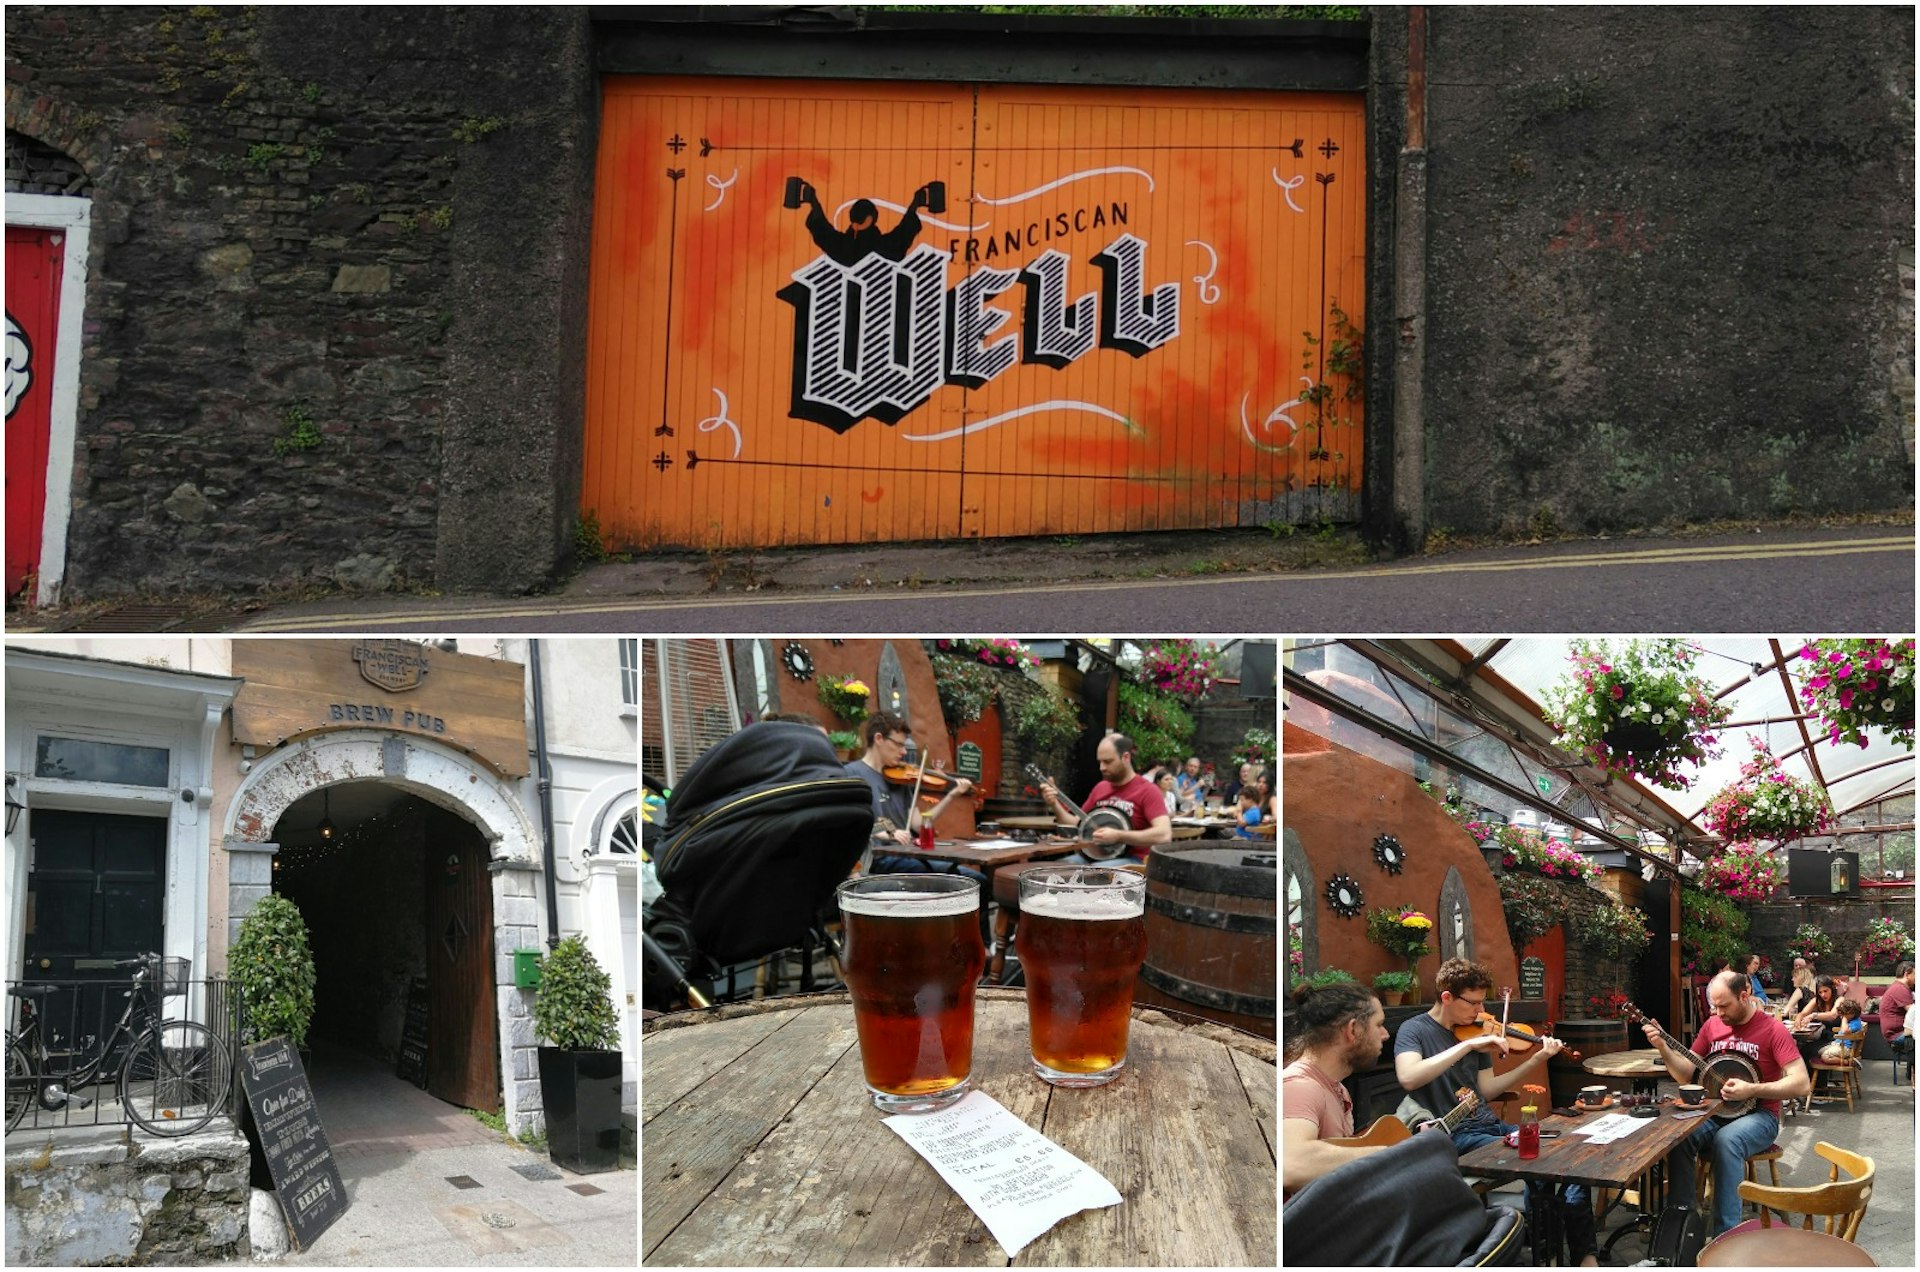 Top: the orange gateway of Franciscan Well: bottom left: the arched entrance to the pub; middle: two pints sitting on a wooden tabletop in the garden; right: traditional musicians performing in the garden.